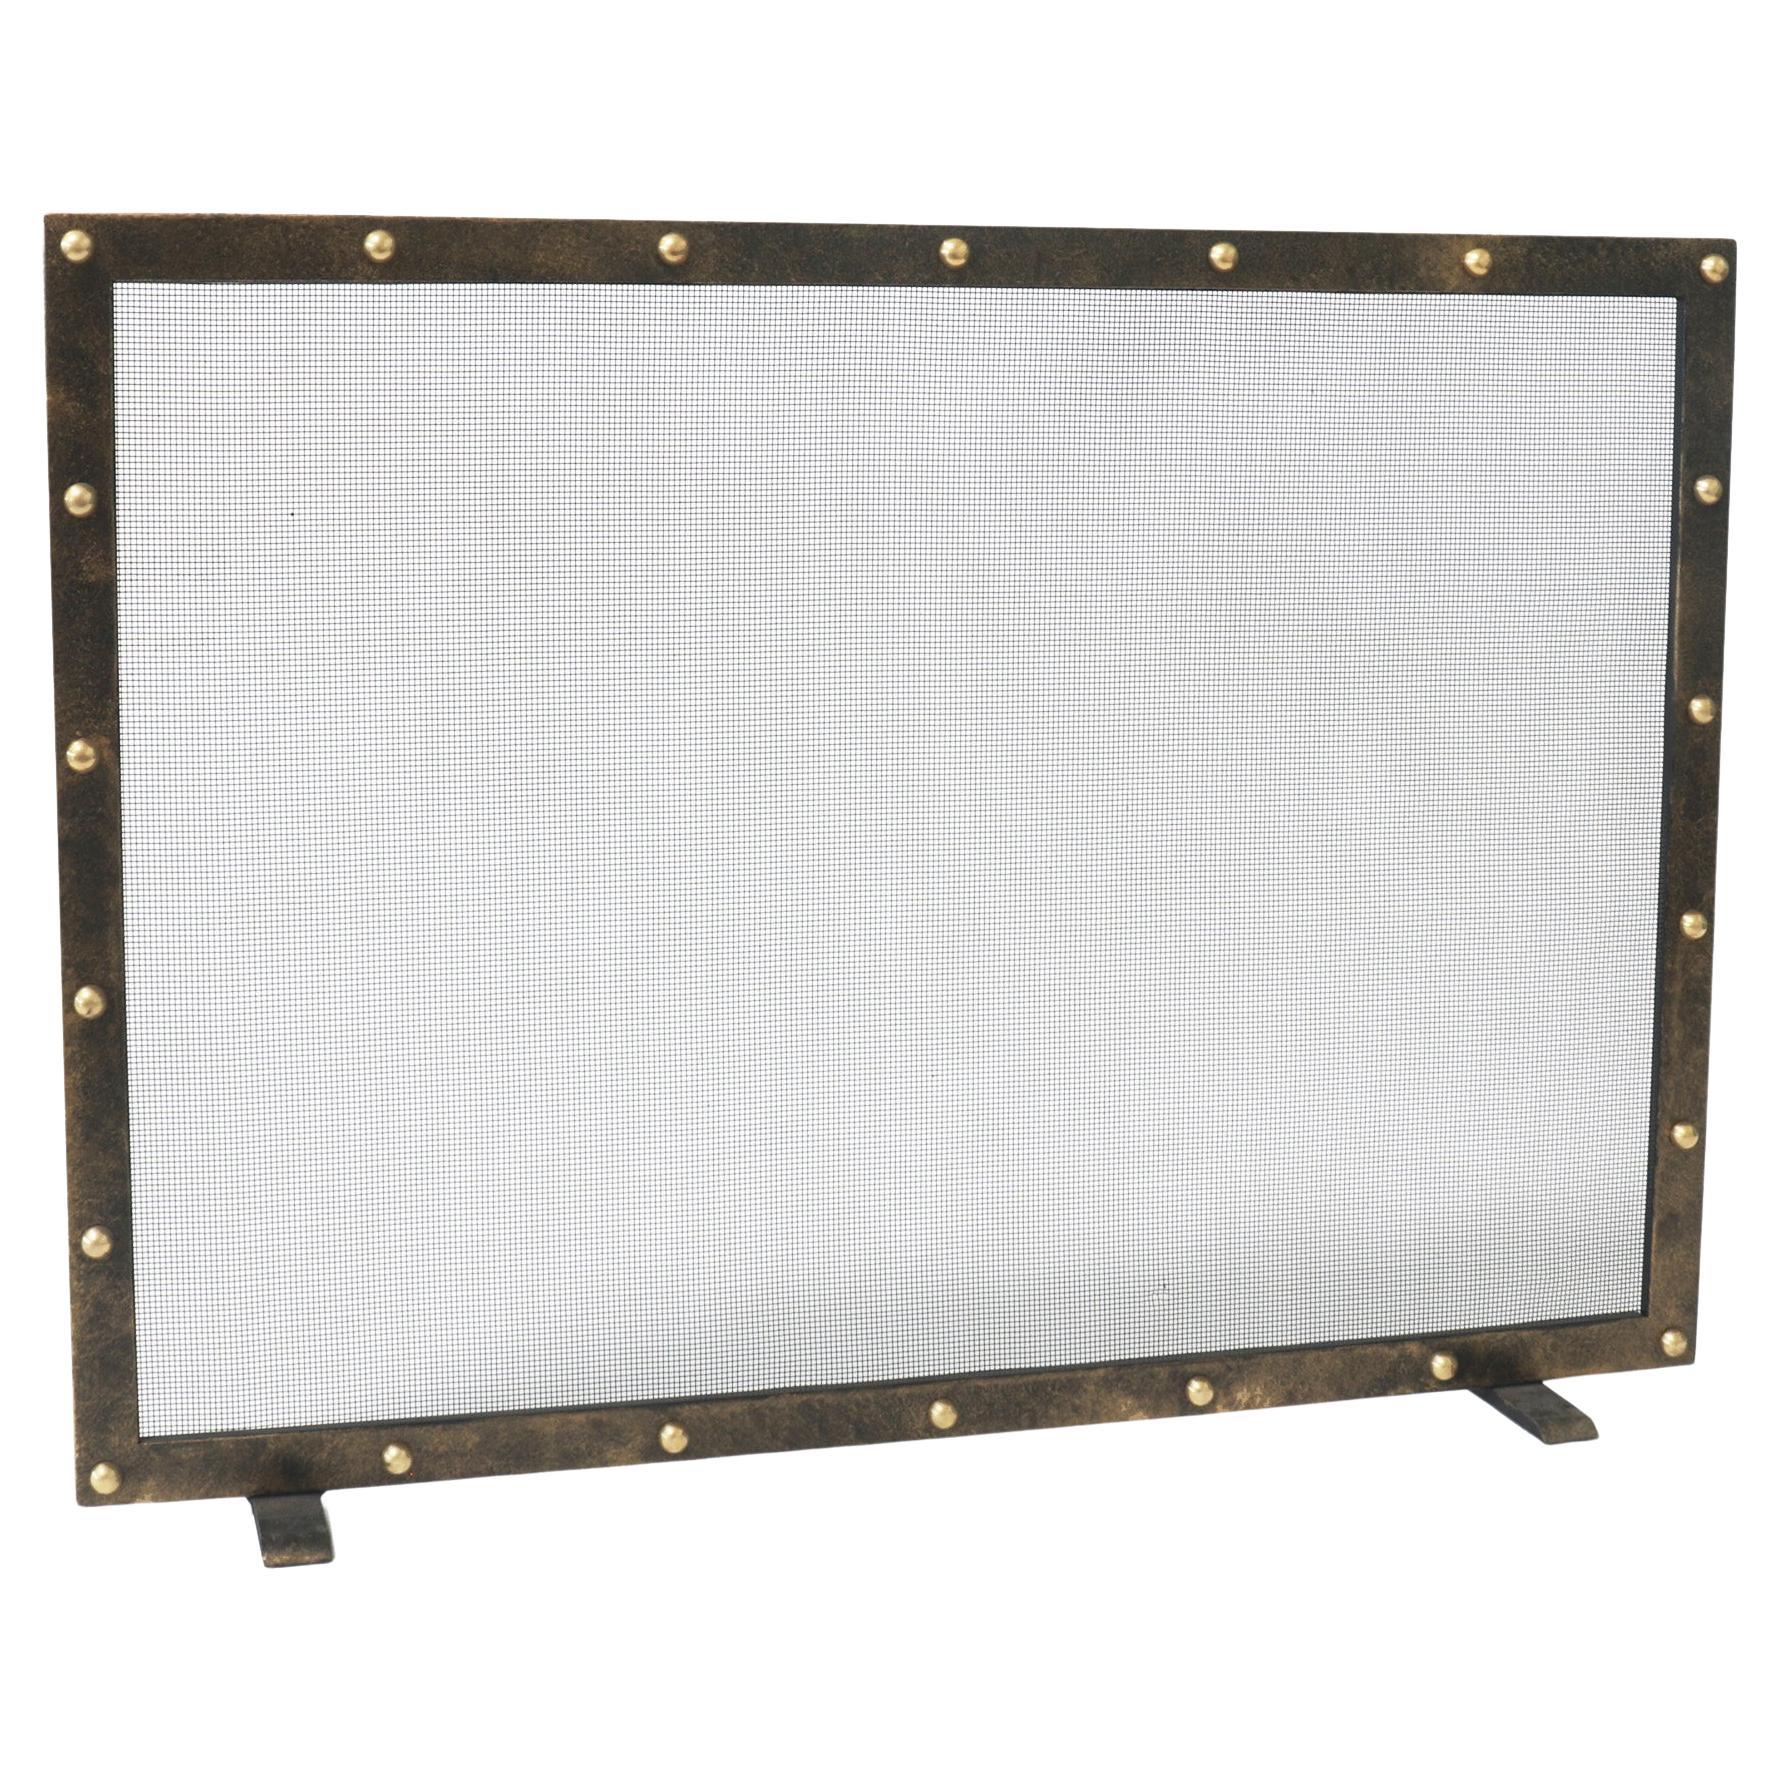 Amelia Fireplace Screen in Gold Rubbed Black